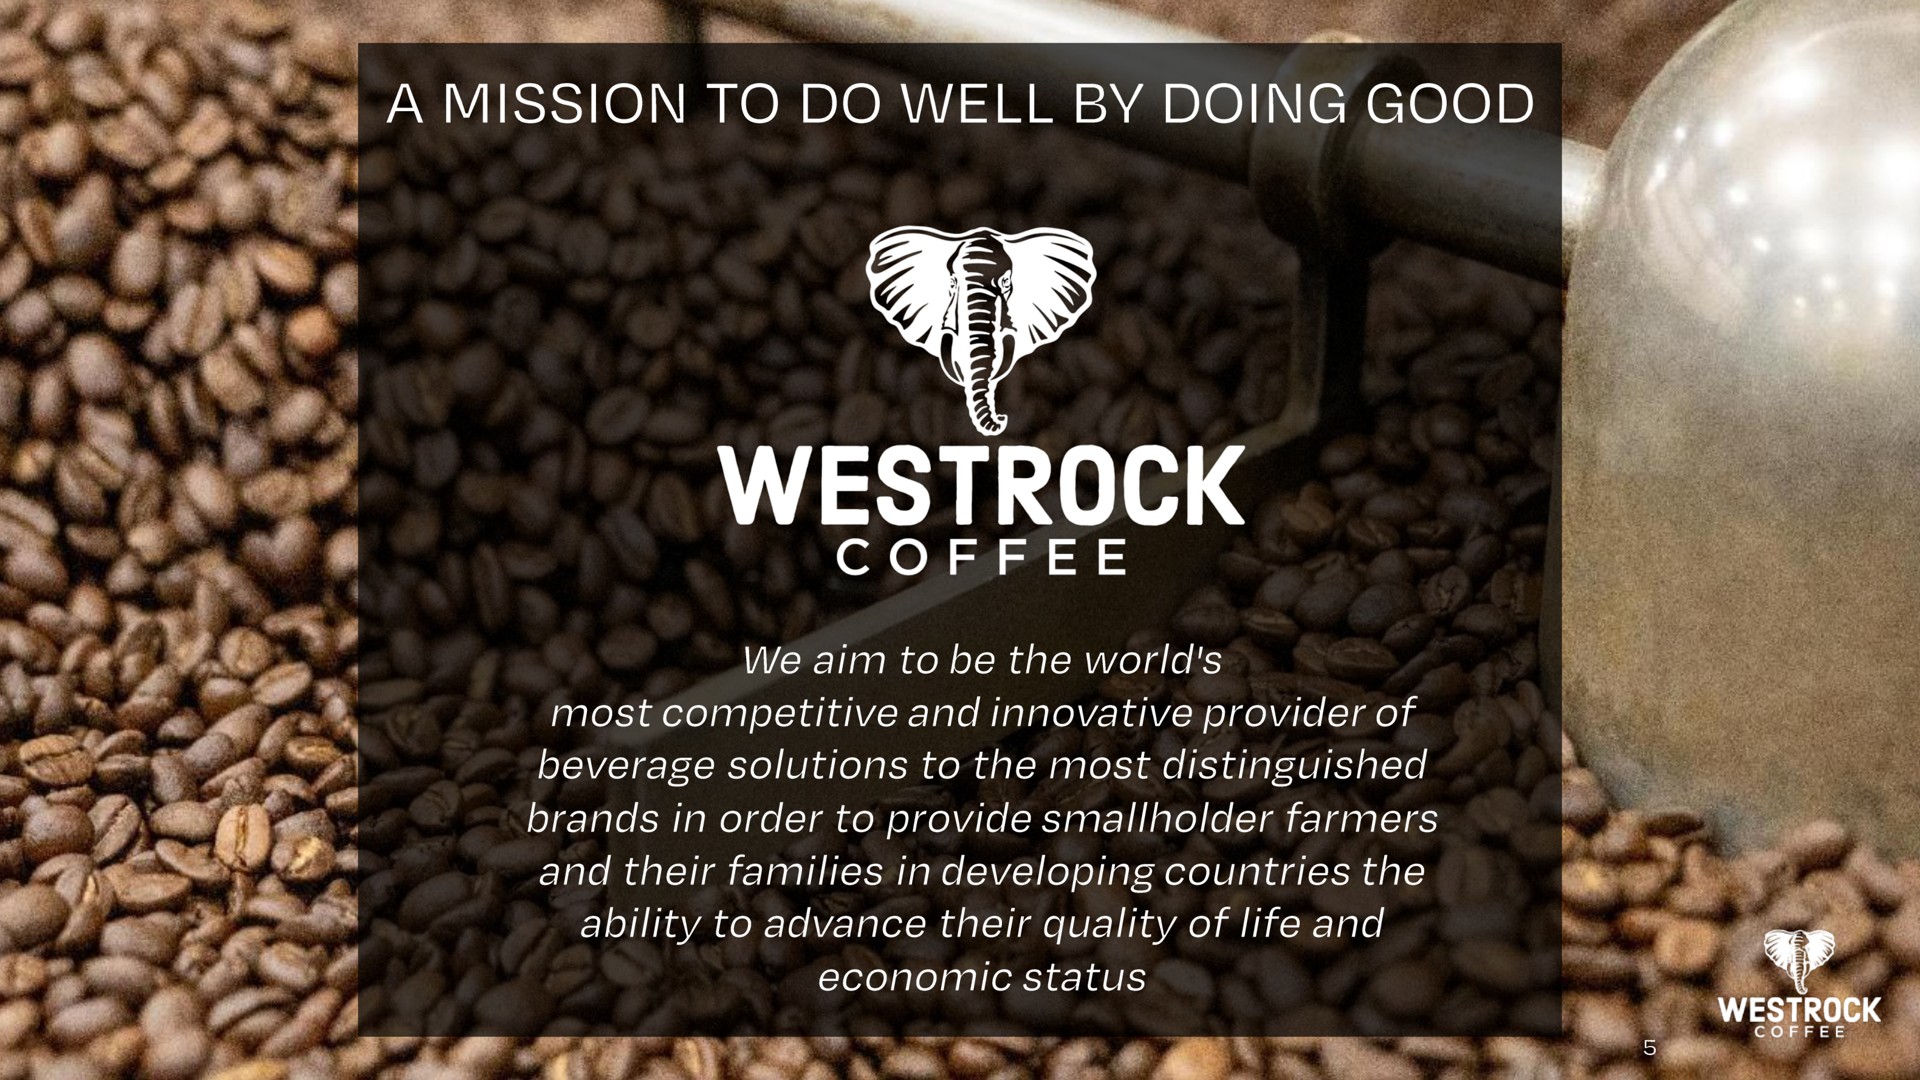 a we aim to be the world most competitive and innovative provider of beverage solutions to the most distinguished brands in order to provide smallholder farmers and their families in developing countries the ability to advance their quality of life and economic status | Westrock Coffee